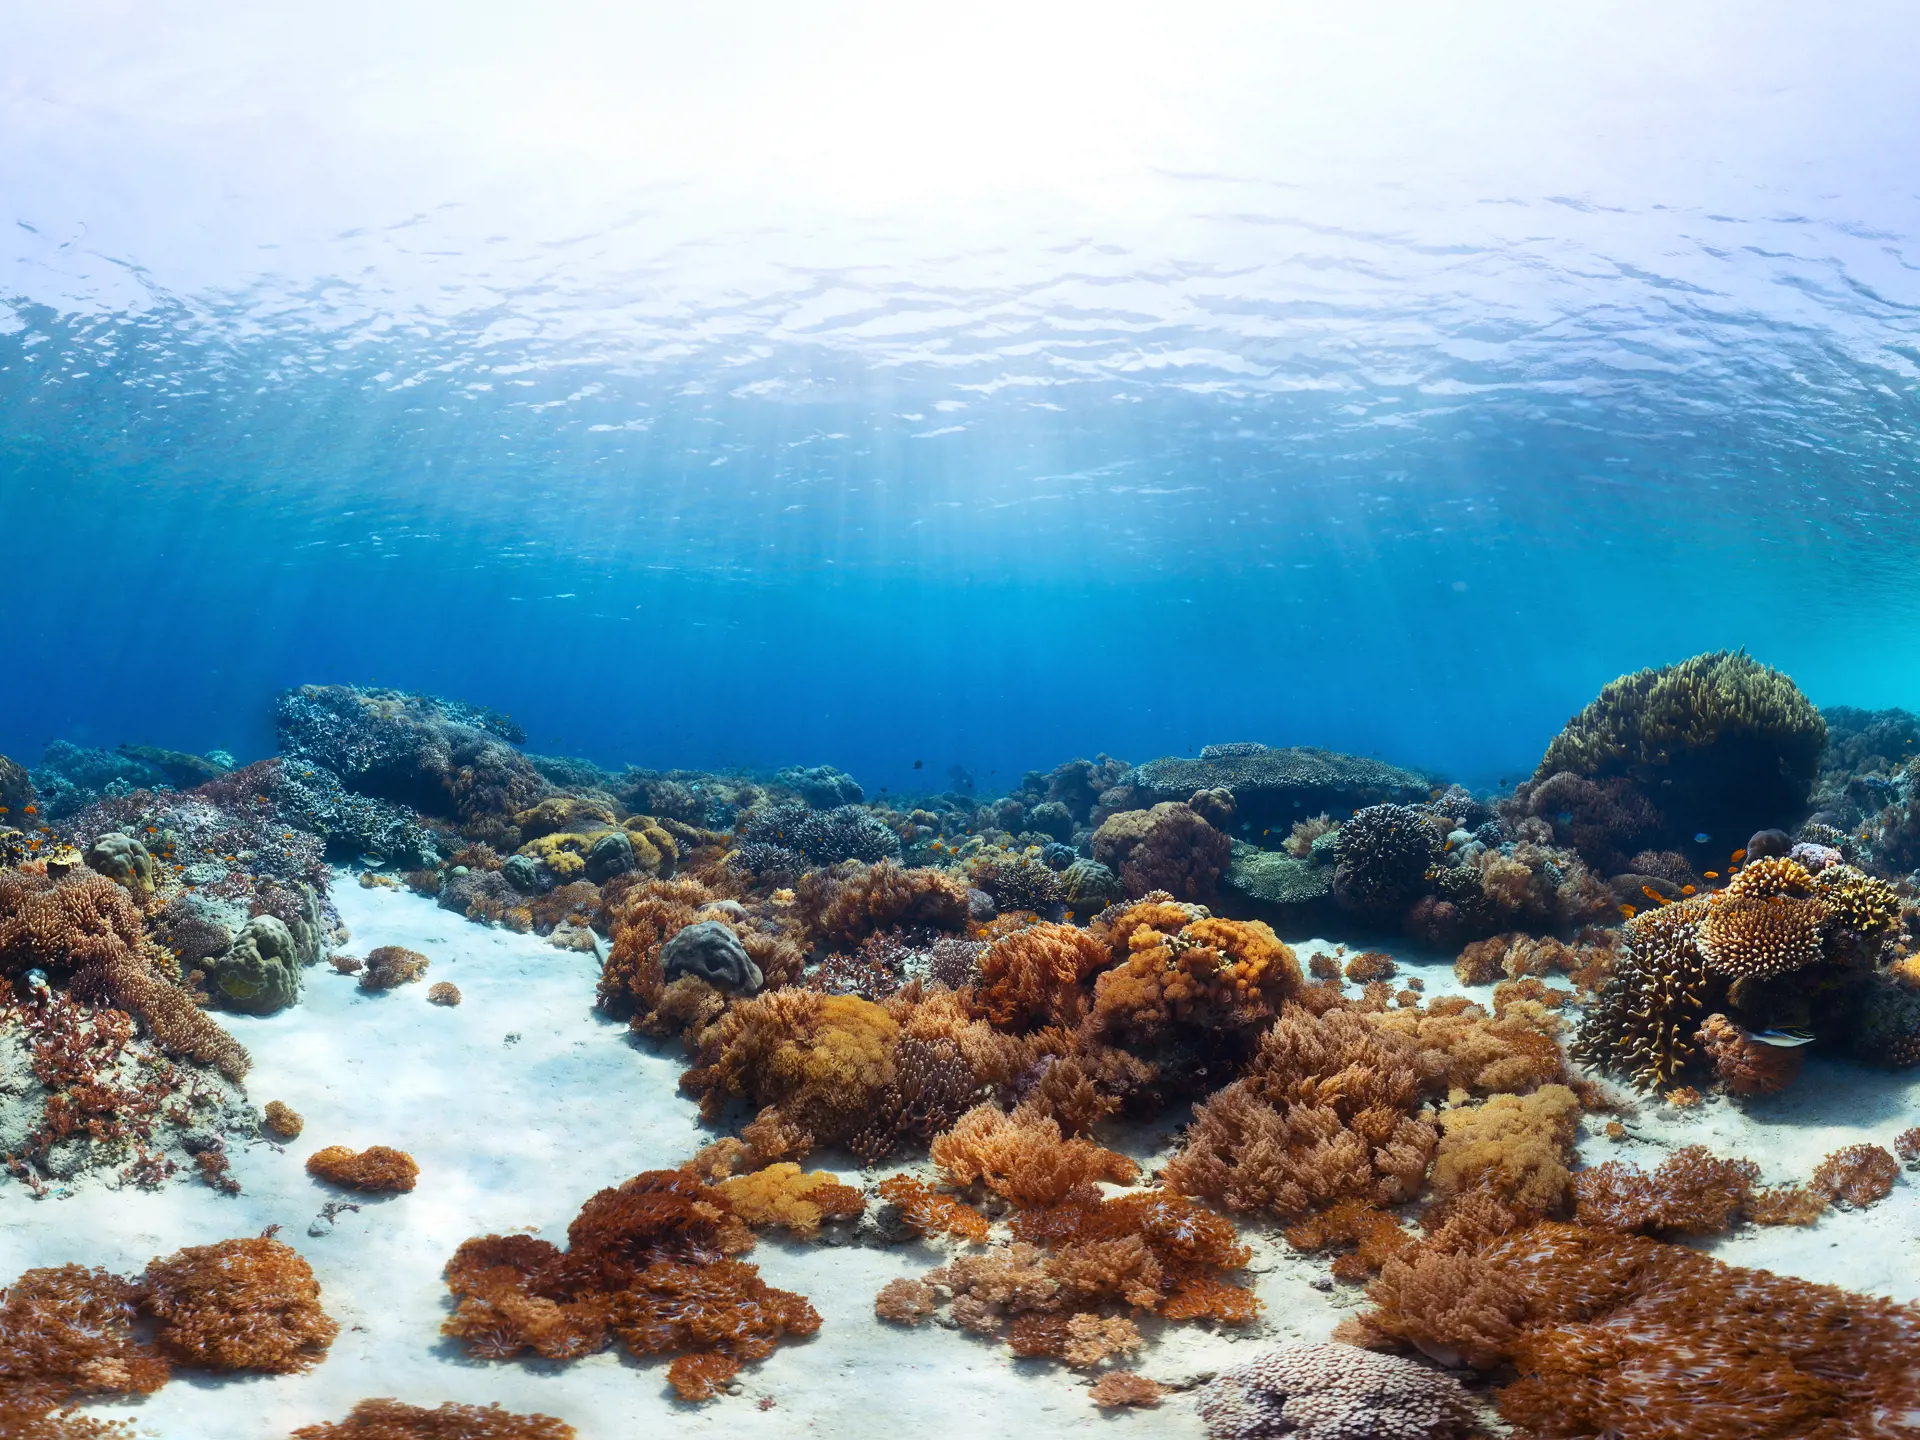 Underwater panorama of the young lady snorkeling over vivid coral reef in tropical sea. Bali Barat National Park, Indonesia.jpg